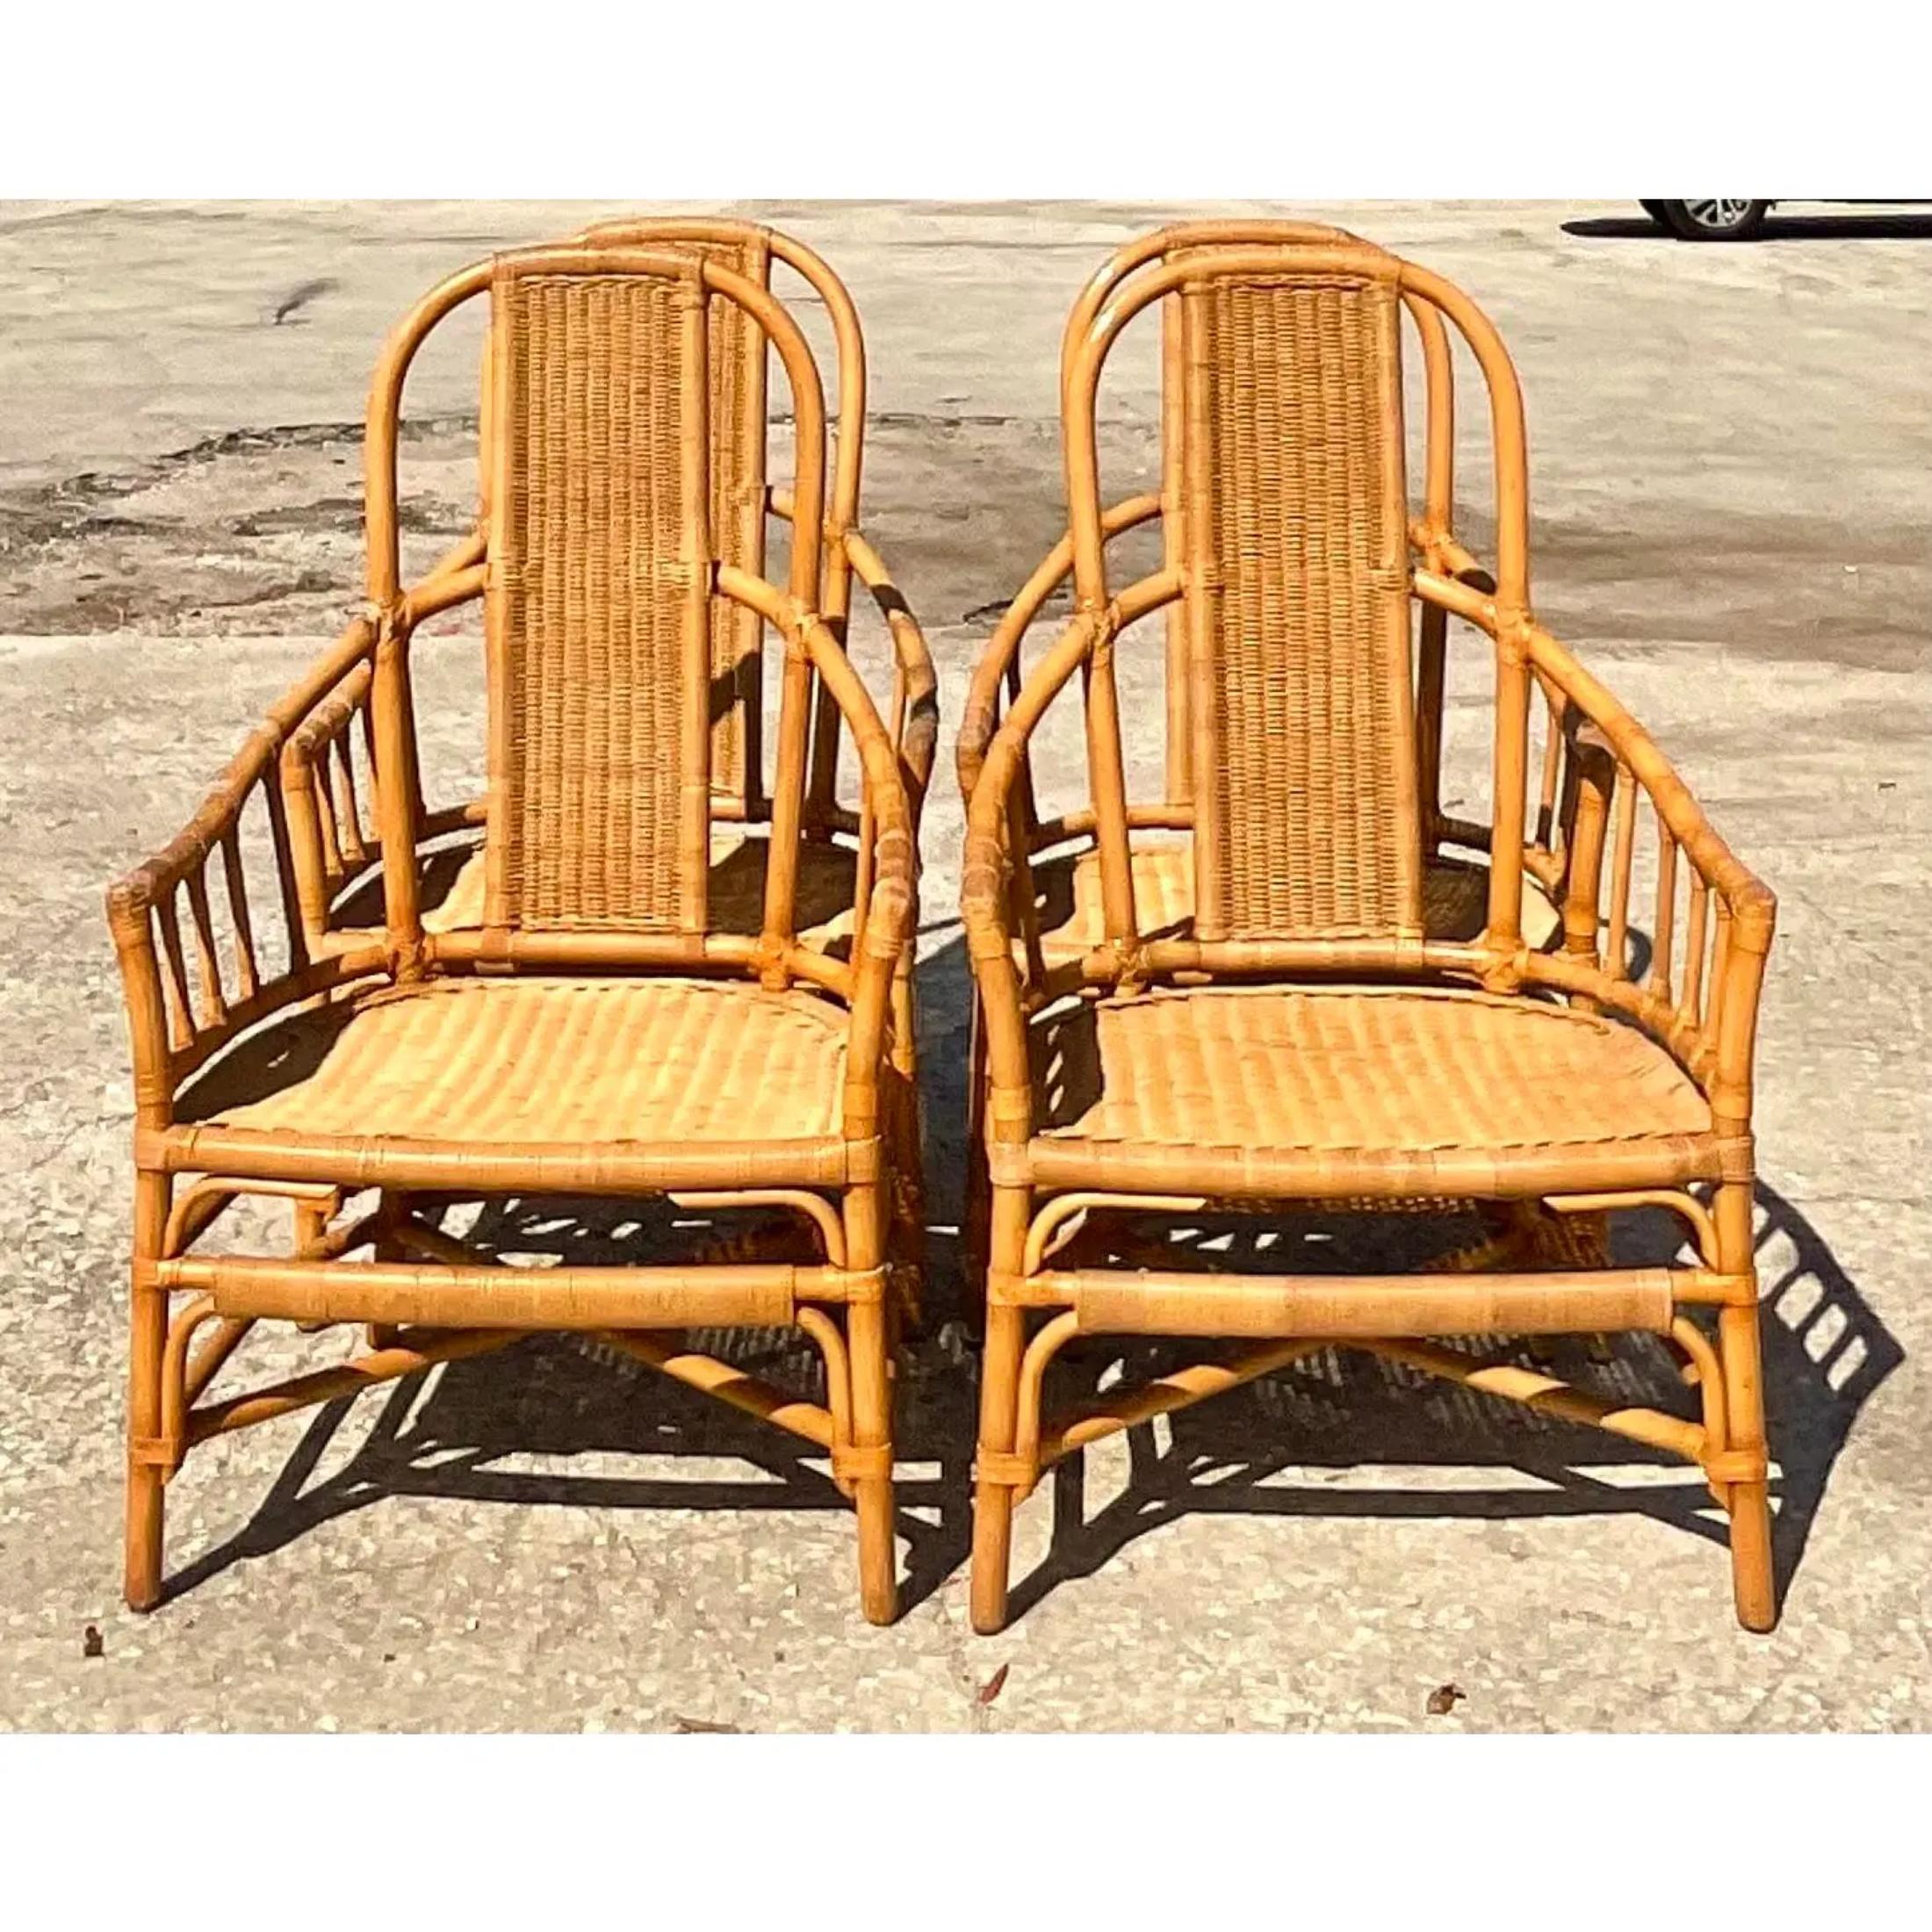 Vintage Coastal Mark David Woven Rattan Dining Chairs - Set of 4 For Sale 3